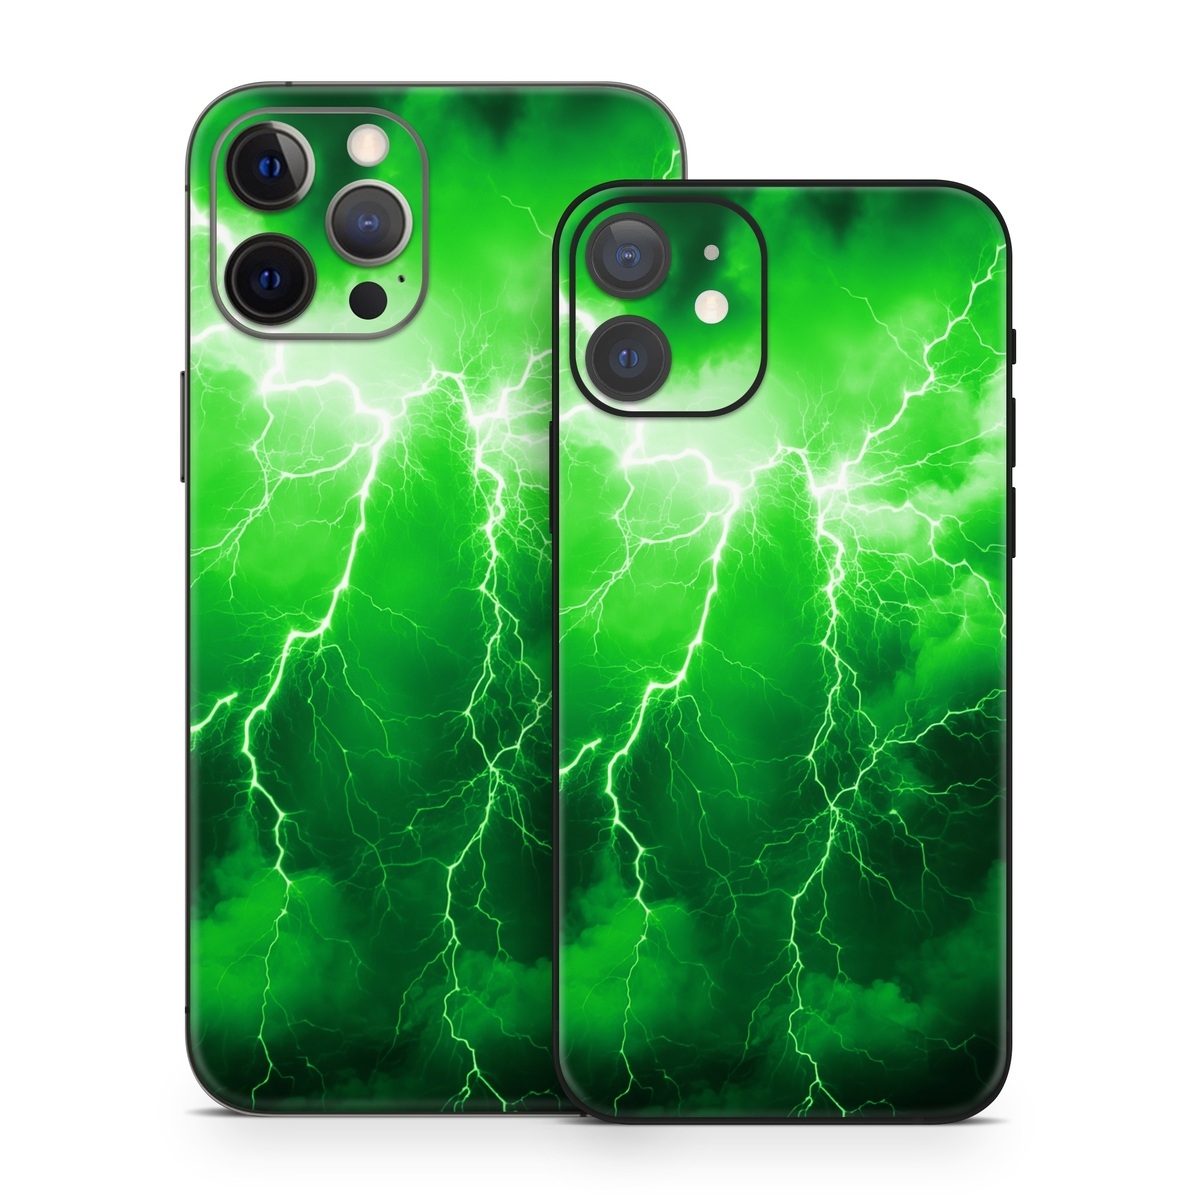 iPhone 12 Series Skin design of Water, Atmosphere, Thunder, Light, Green, Sky, Natural environment, Natural landscape, Electricity, Organism, with black, green colors